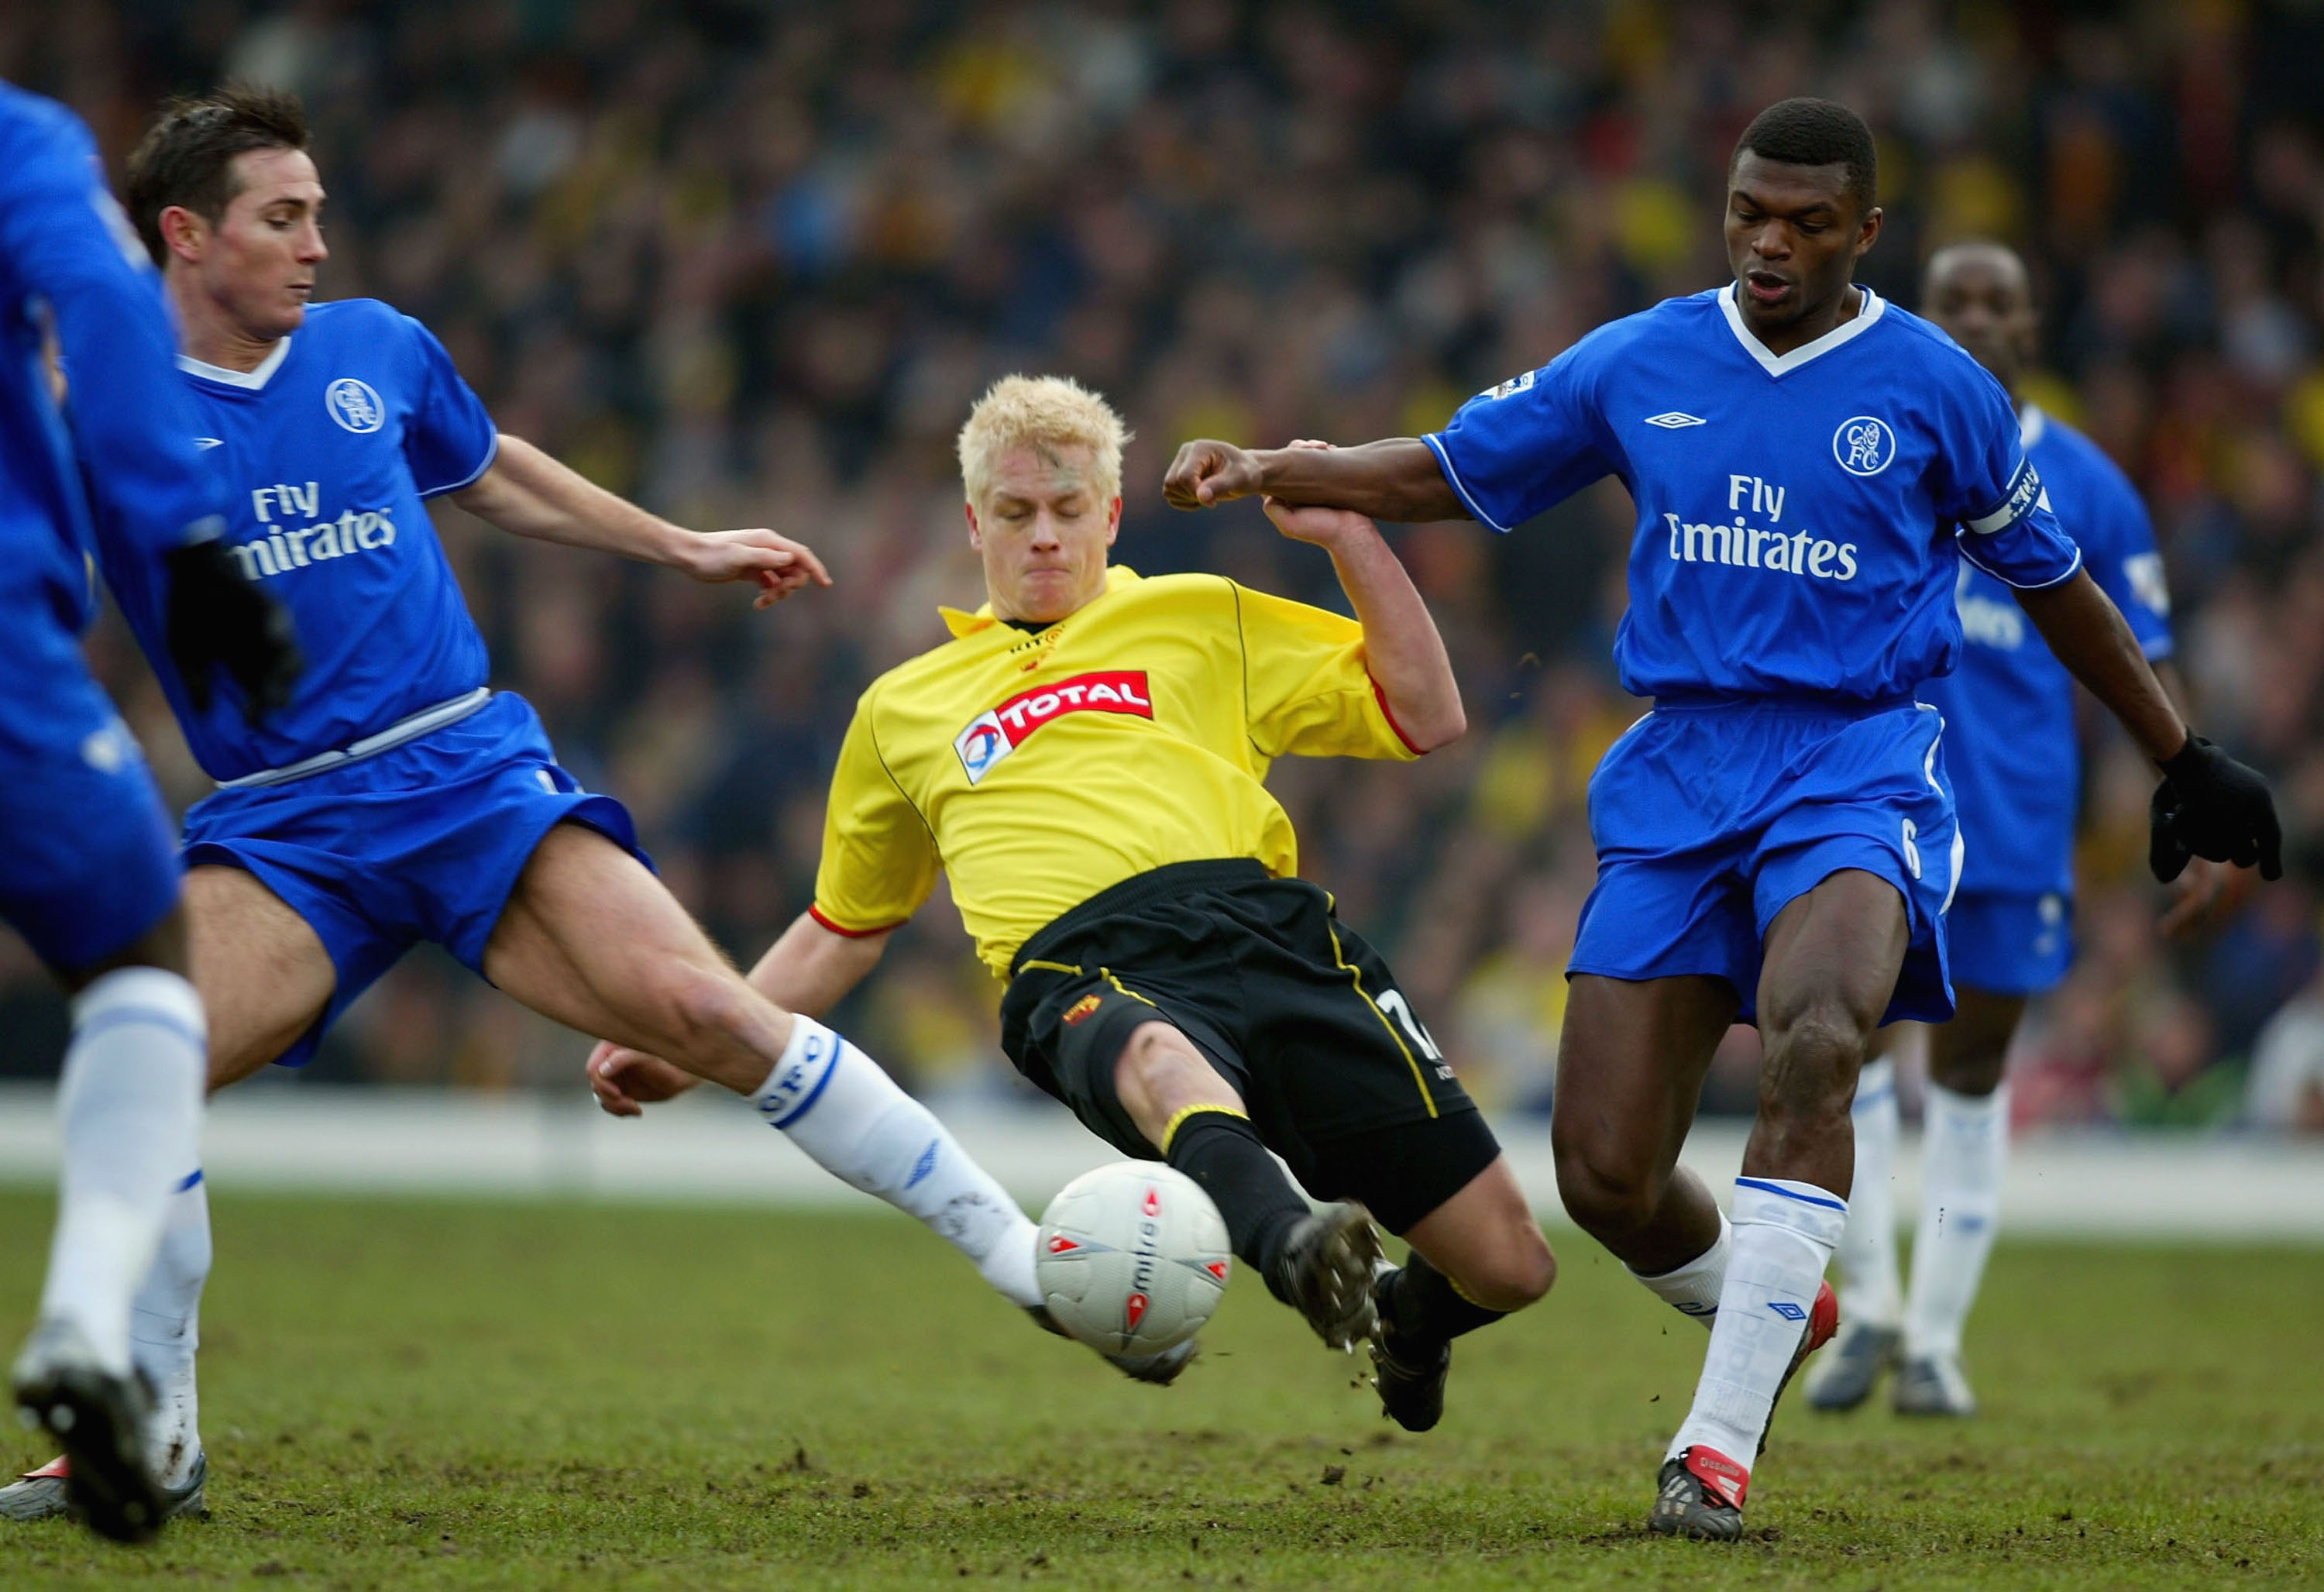 WATFORD, ENGLAND - JANUARY 3:  Frank Lampard and Marcel Desaily of Chelsea tries to tackle Heidar Helguson of Watford during the FA Cup Third Round match between Watford and Chelsea at Vicarage Road on January 3, 2004 in Watford, England. (Photo by Ben Ra